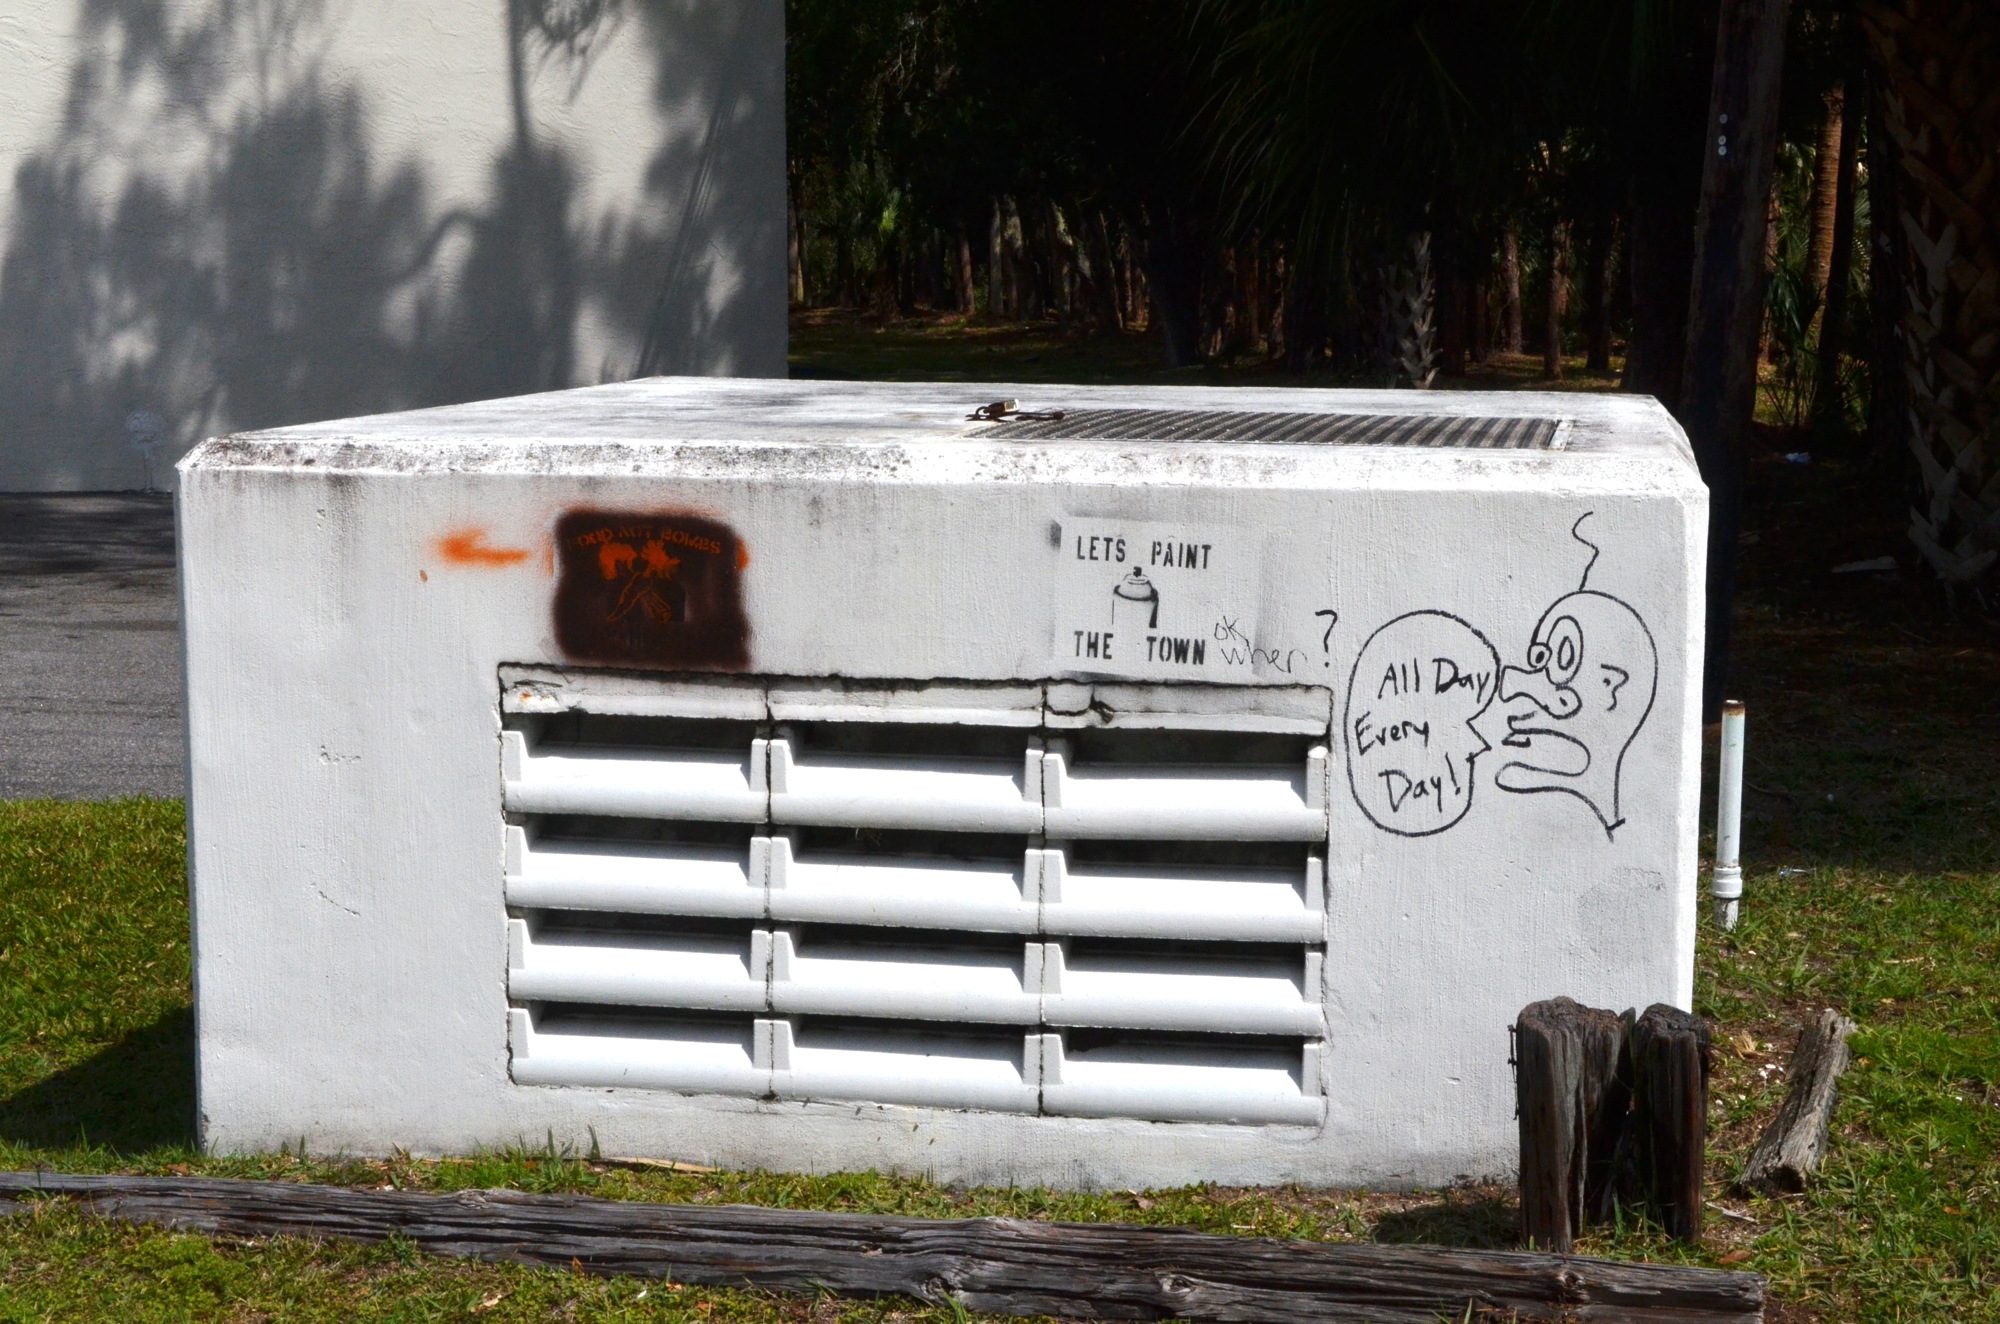 A utility box on North U.S. 1 had graffiti on all four sides on a recent morning.